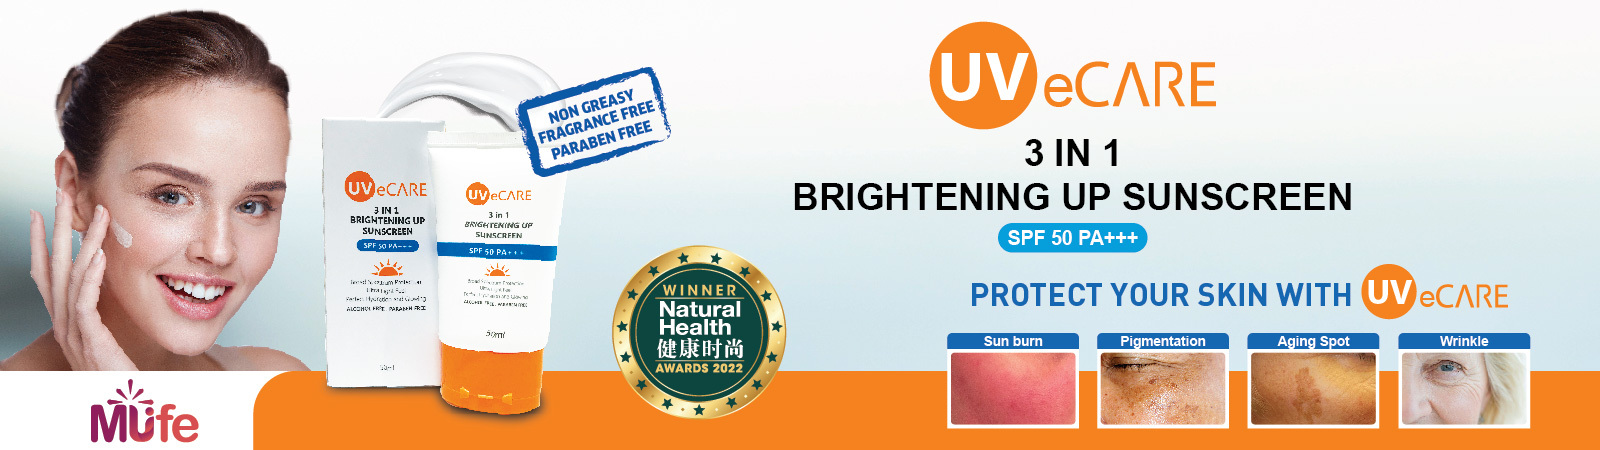 Brighter Skin with UVeCARE 3-in-1 Brightening Up Sunscreen